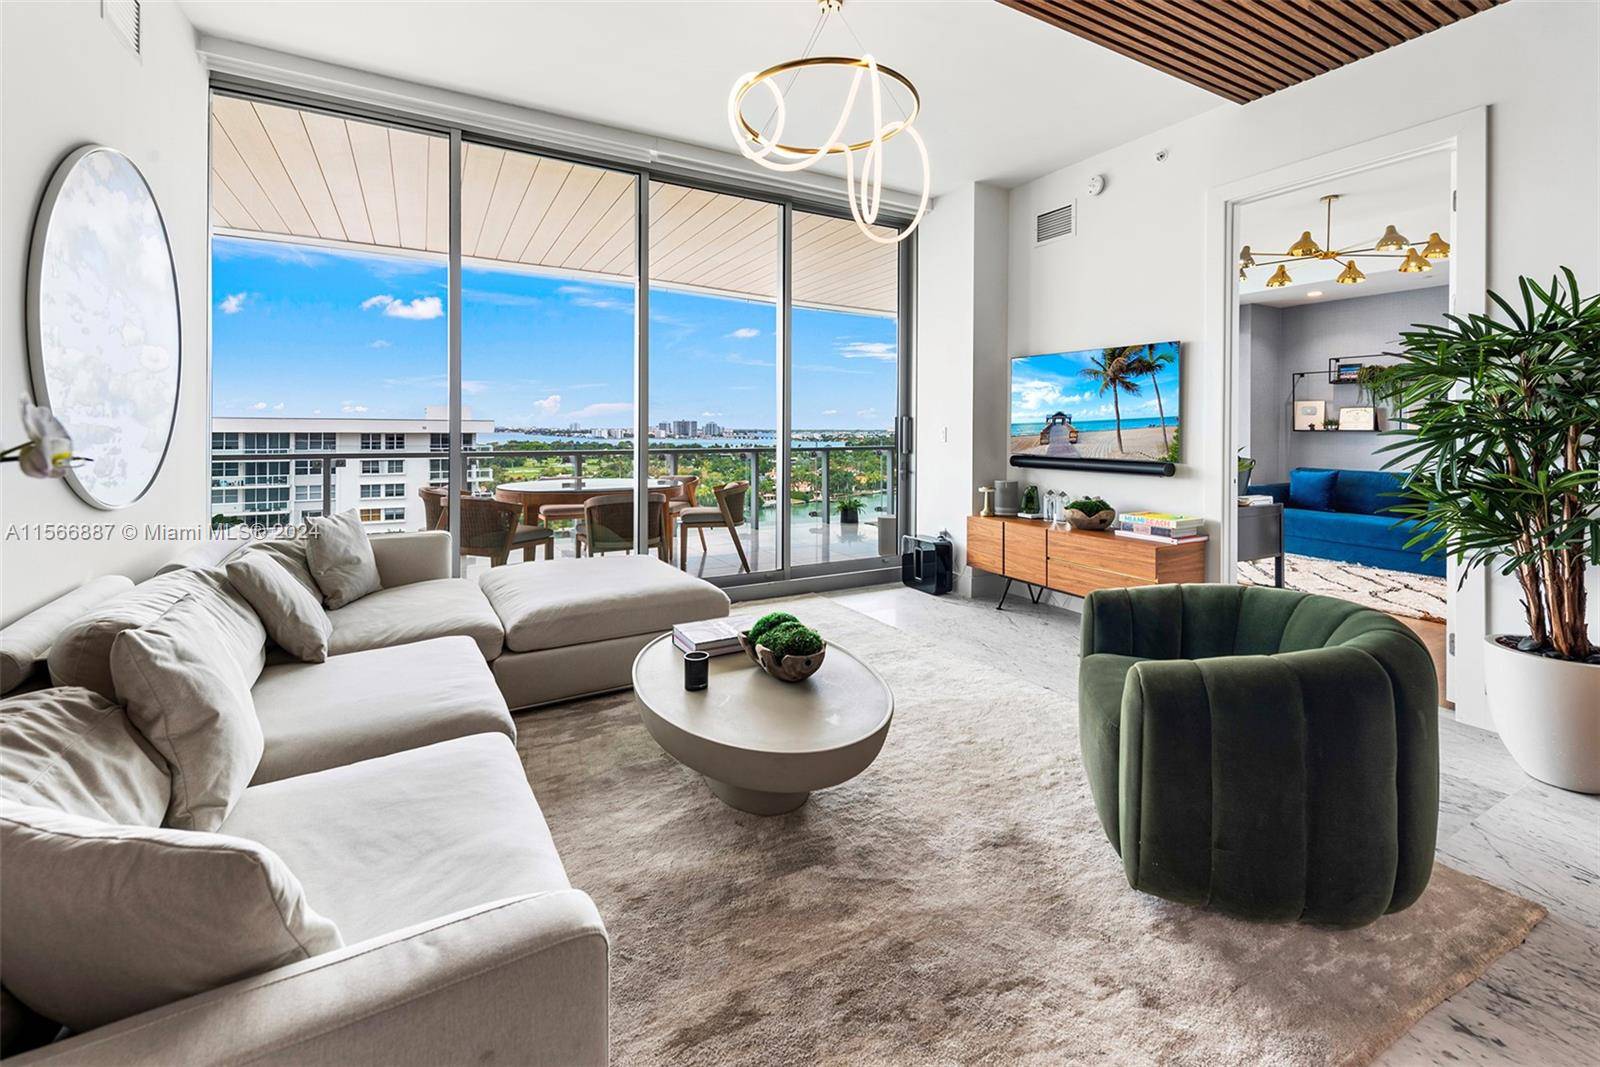 Experience luxury living at its finest in this stunning two bedroom, two and a half bathroom fully furnished residence at 57 Ocean in Miami Beach.